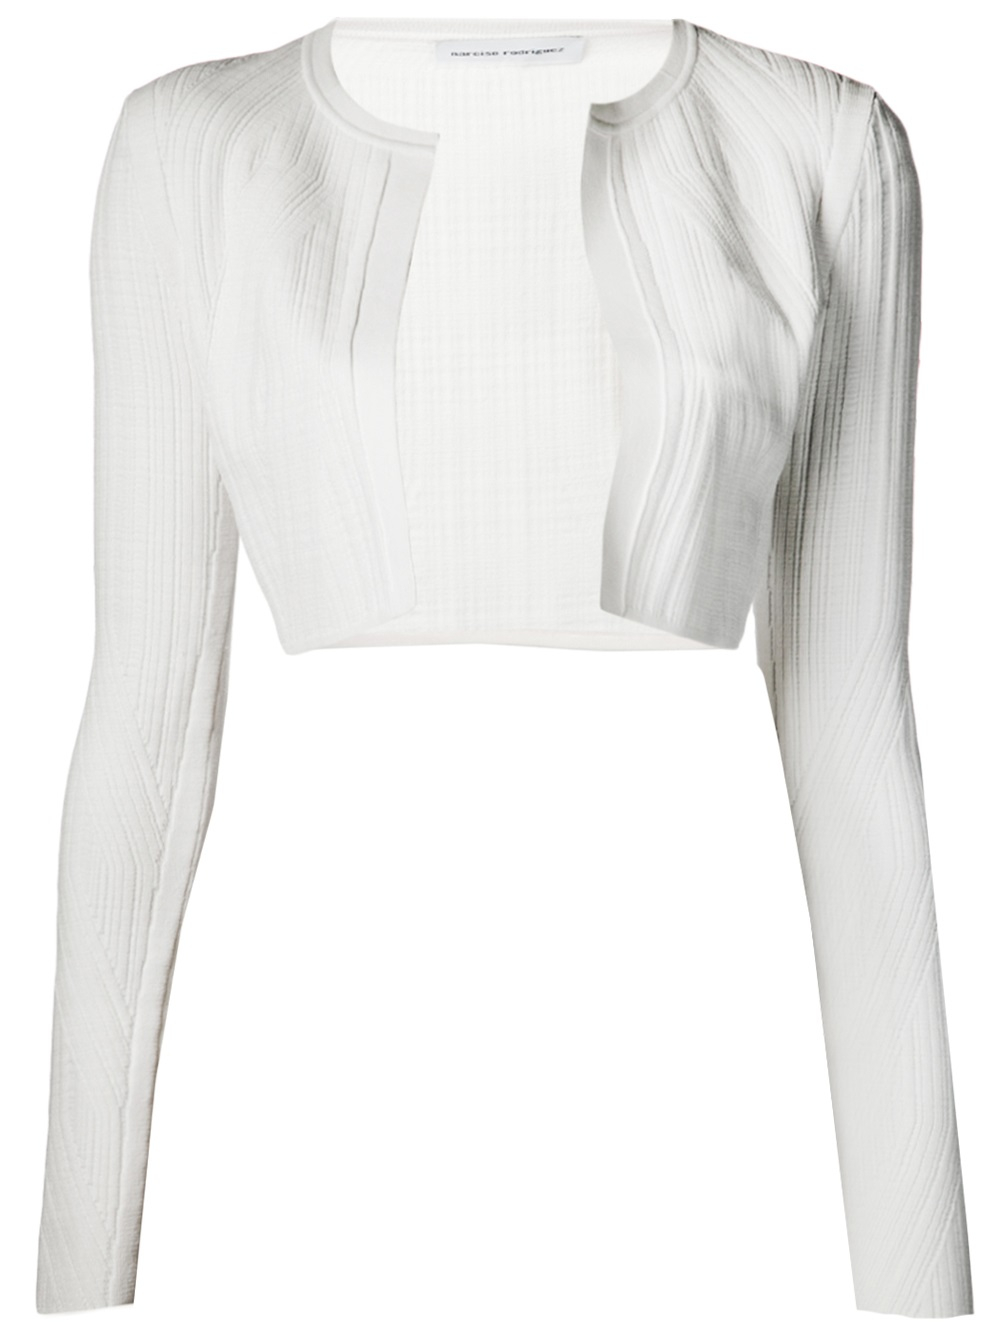 Narciso rodriguez Plaid Knit Crop Sweater in White | Lyst